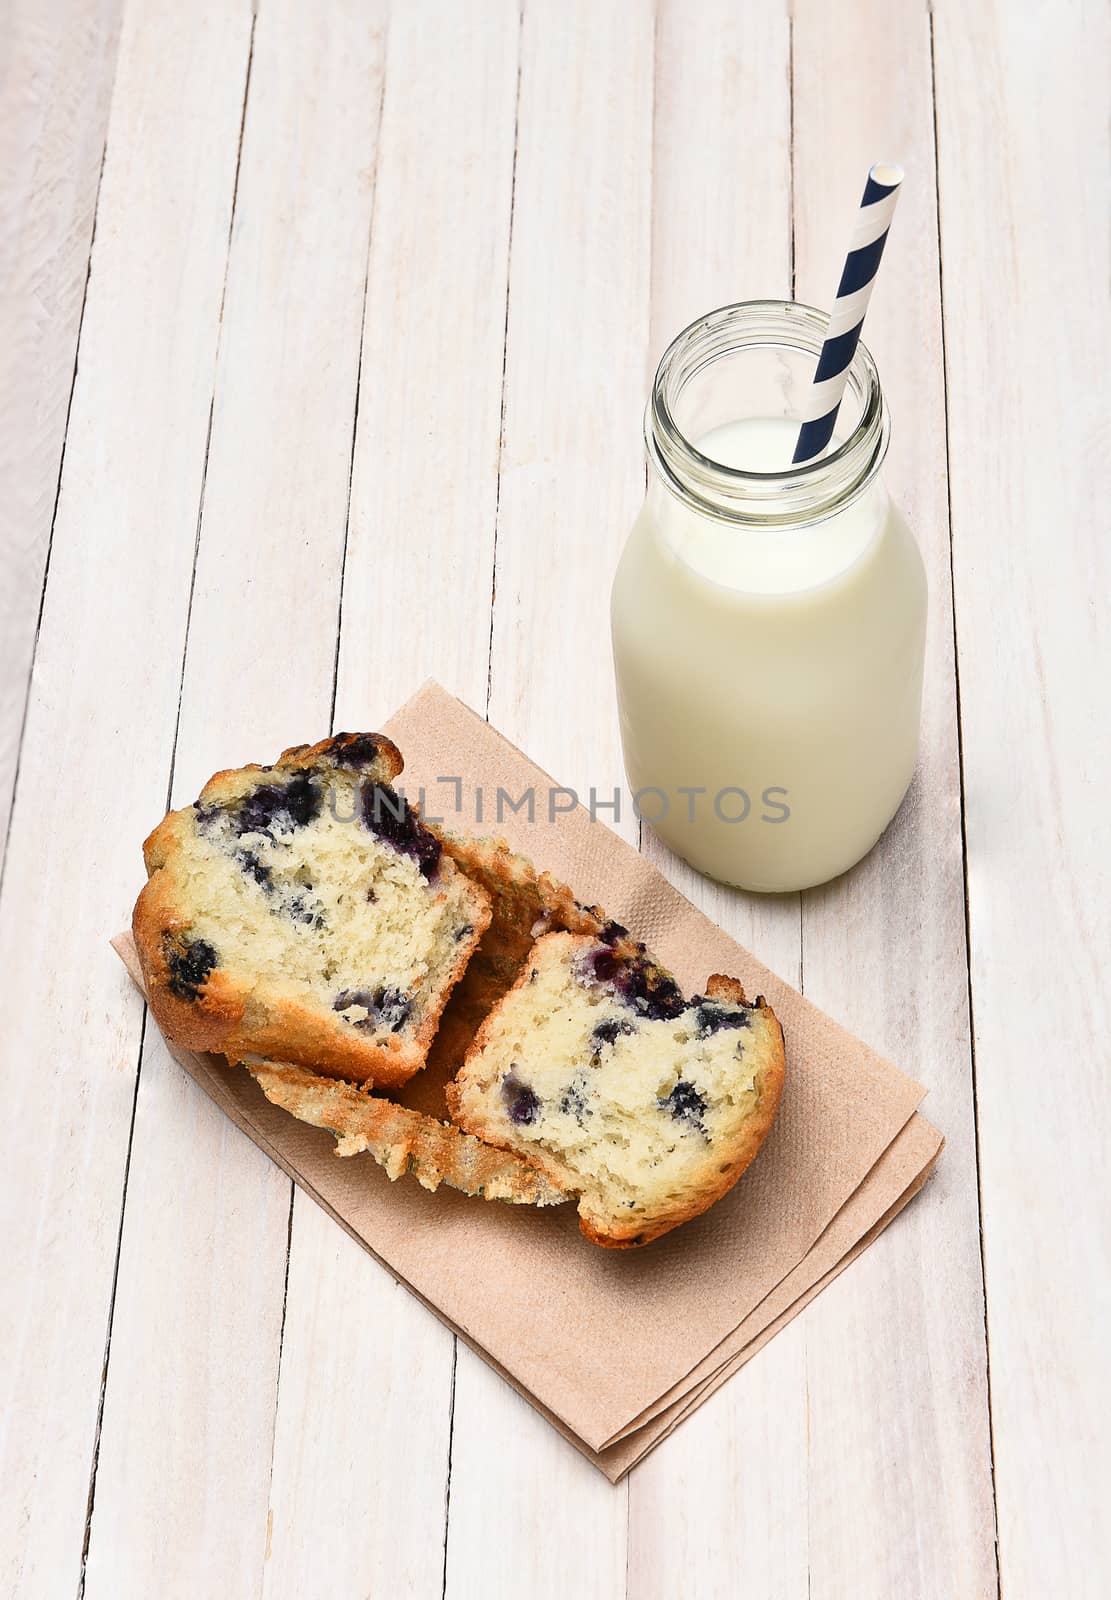 High angle view of a blueberry muffin and bottle of milk on a rustic white table. The muffin is broken in half on a napkin. Vertical format.